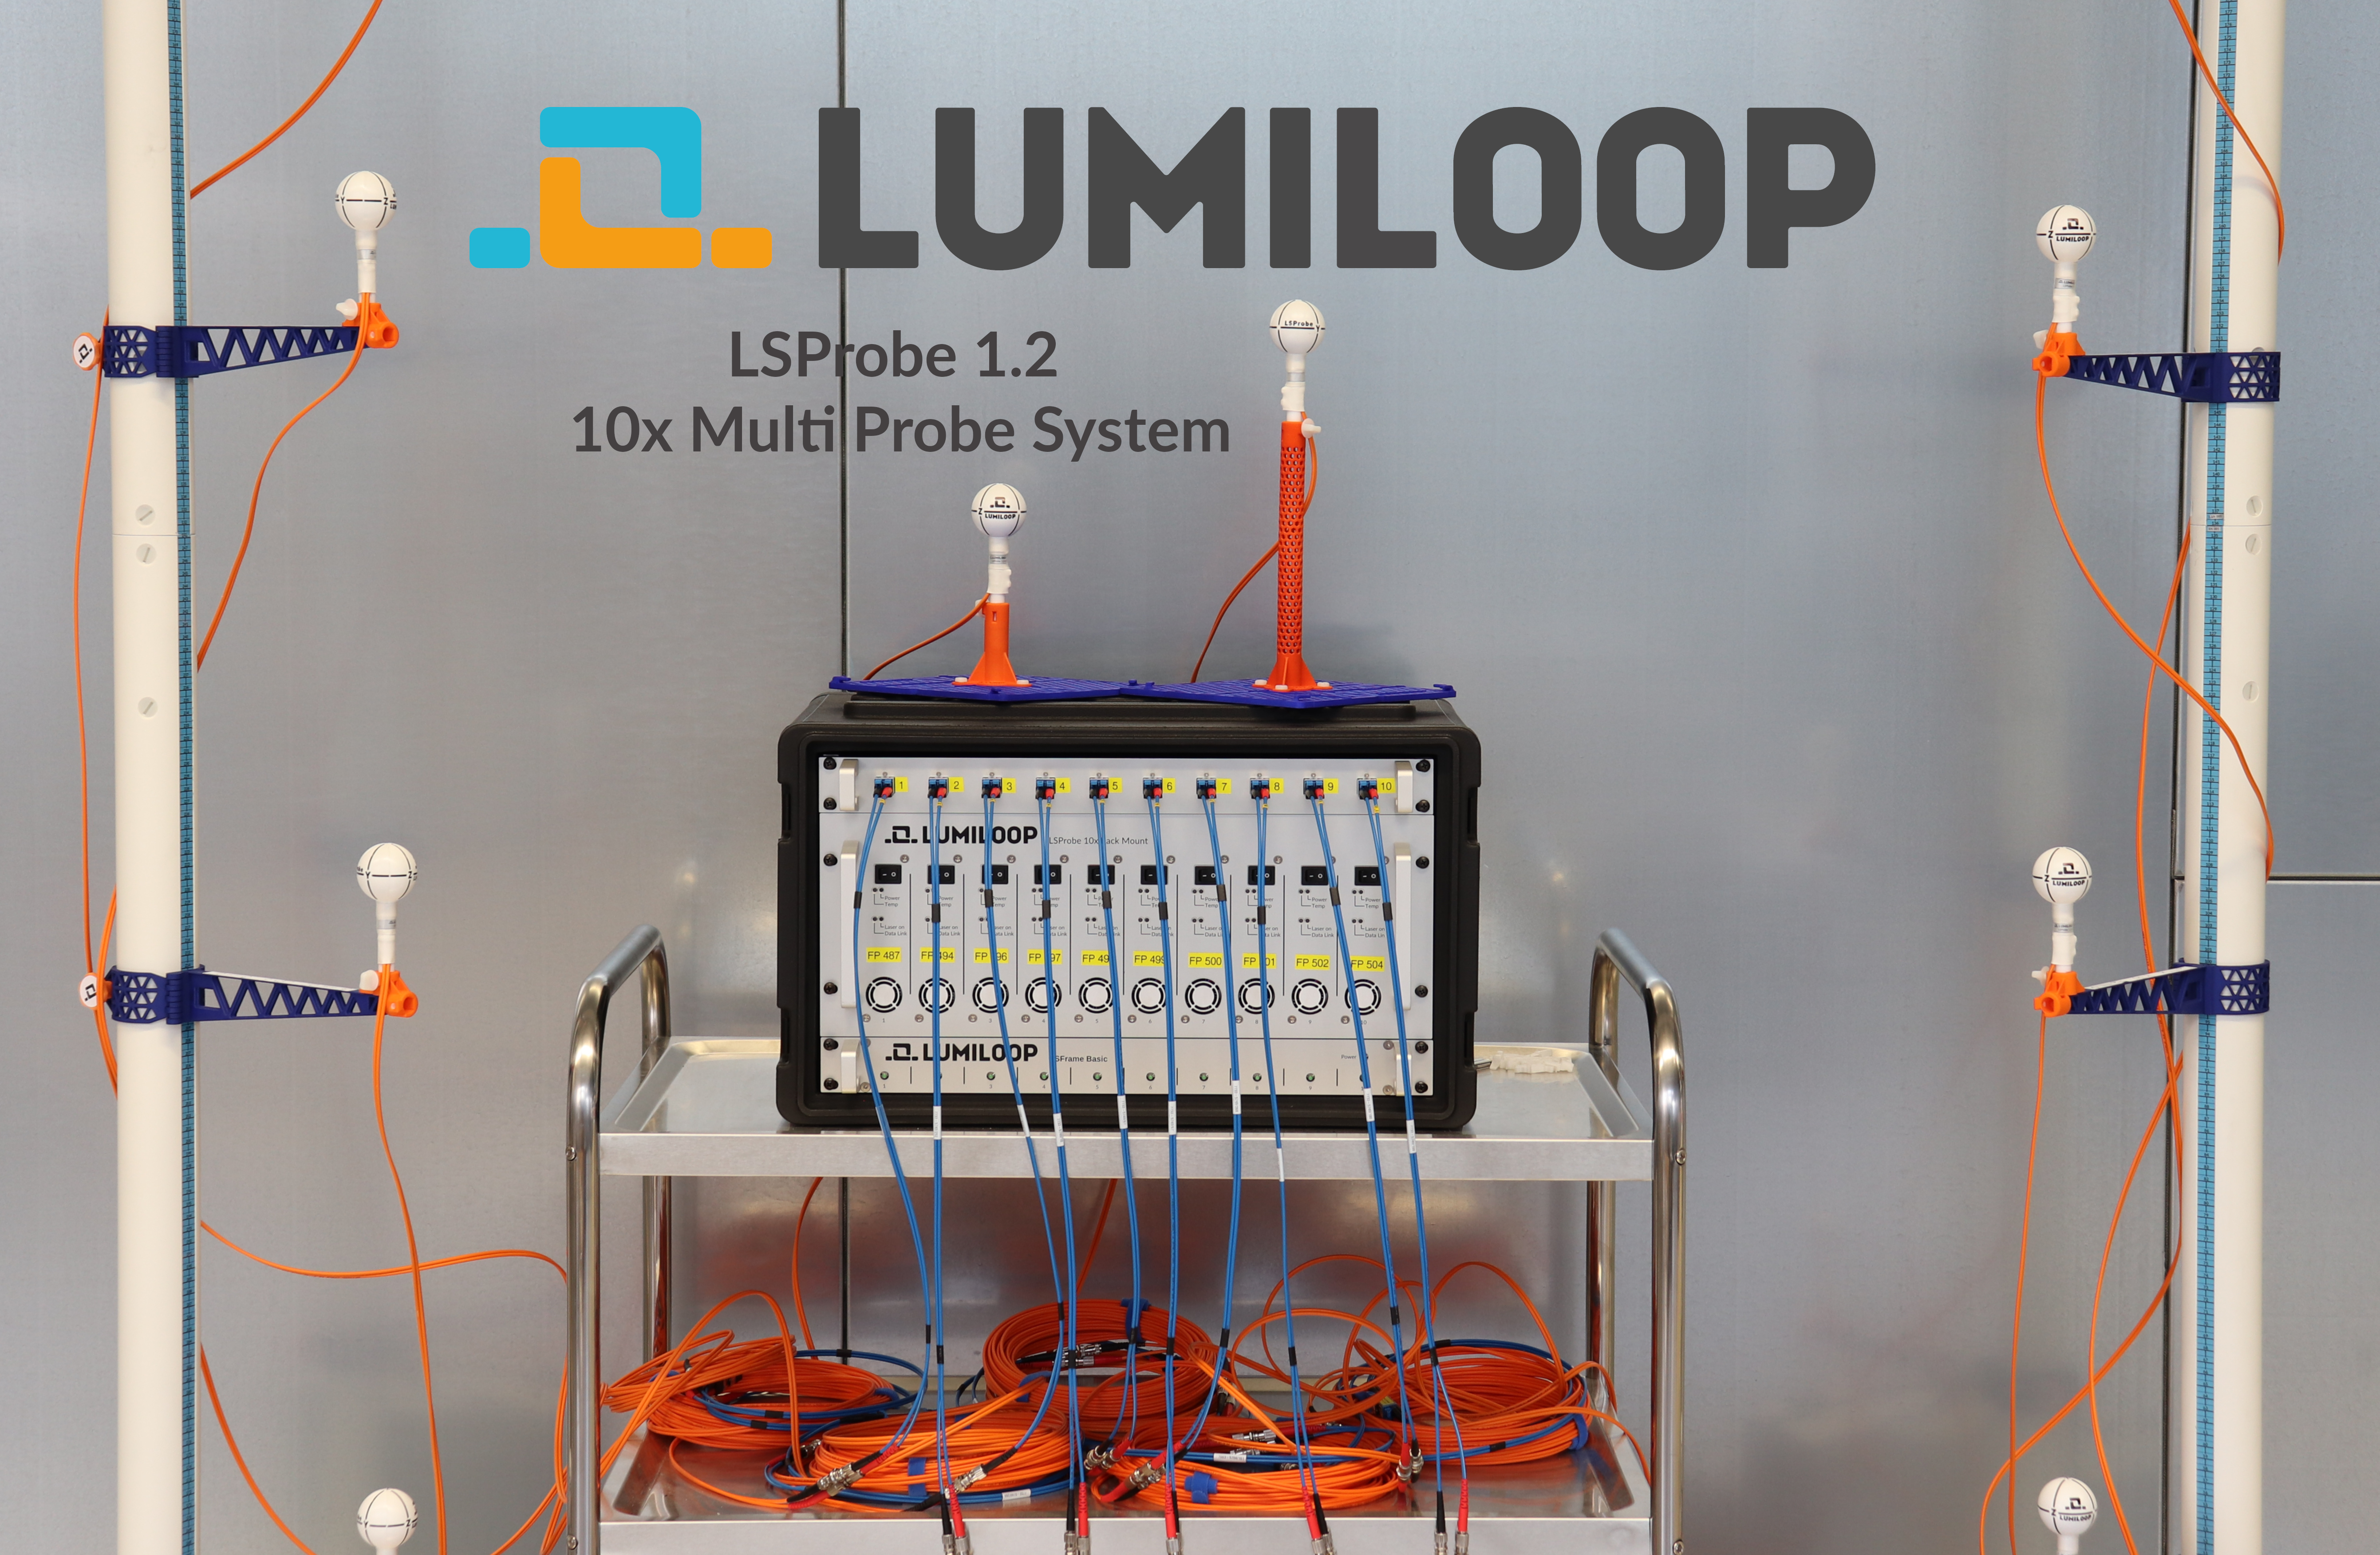 Gallery LSFrame System for multiple probe usage with minimal rack space